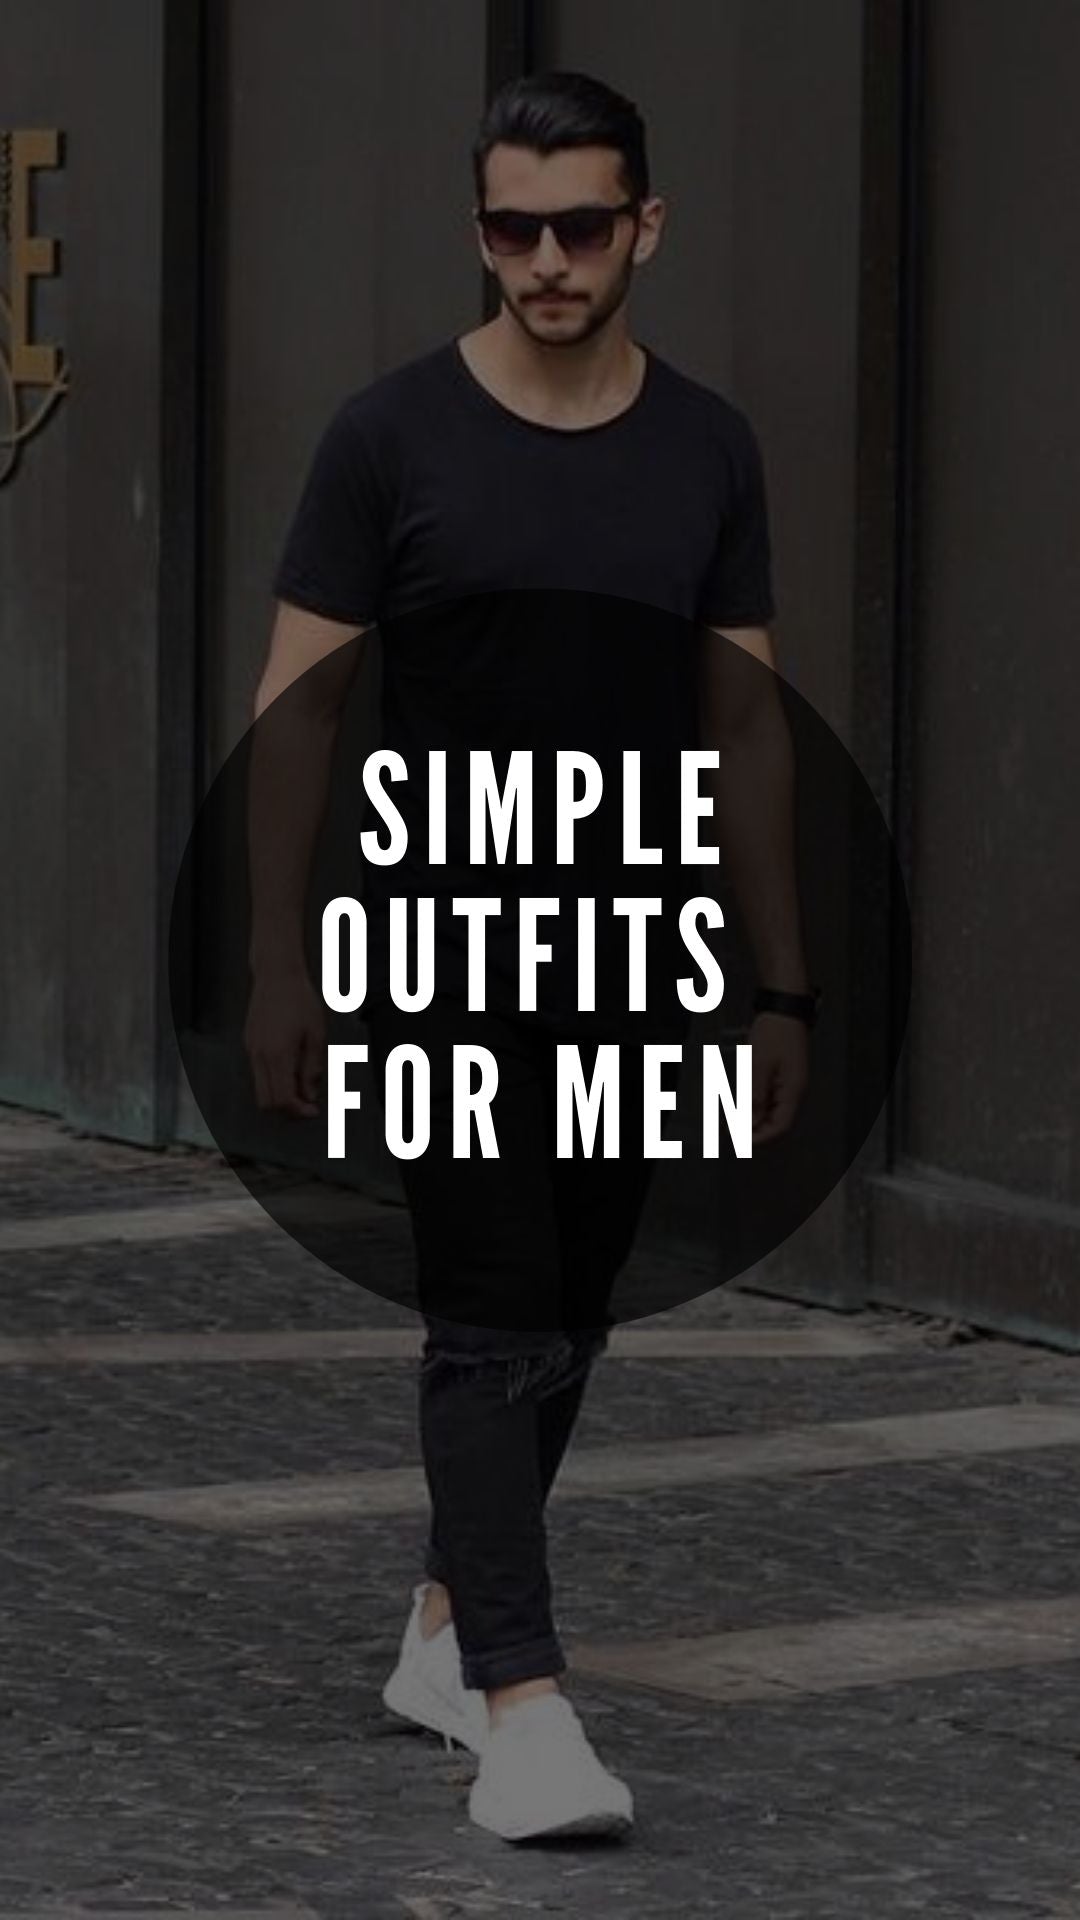 7 Timeless Outfits For Men - LIFESTYLE BY PS